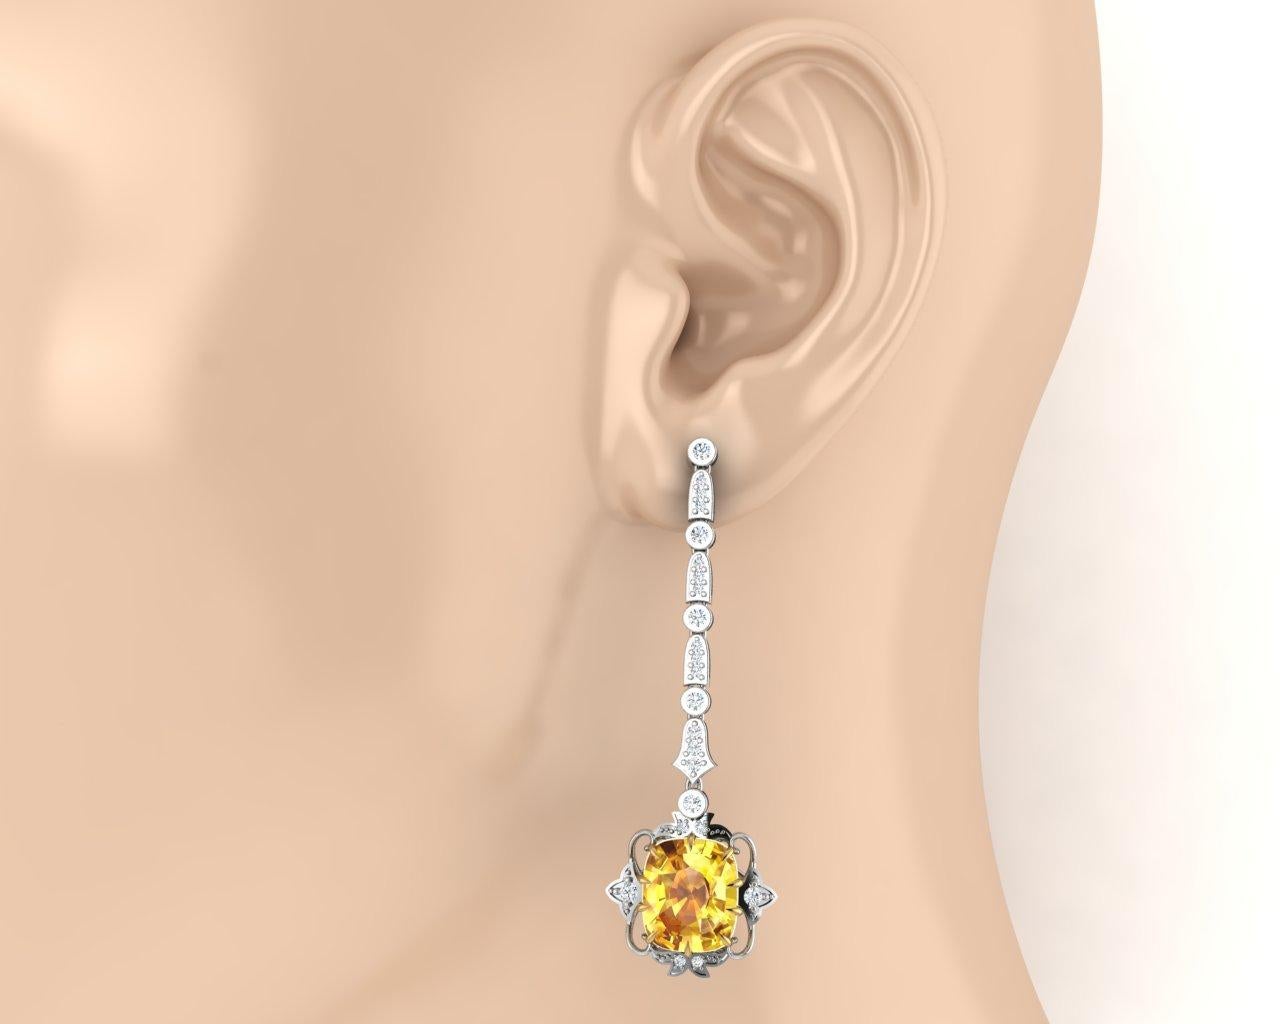 ~20 Ctw Natural Unheated GIA Yellow Sapphire Art Deco Look Earrings

Sapphire Details:
Carat Weight: 17.5 Carats Total Approximately
Shape: Cushion
Color: Yellow
Clarity: Eye Clean 
Cut: Excellent
Treatment: None ( GIA Certified)
Origin: Ceylon (